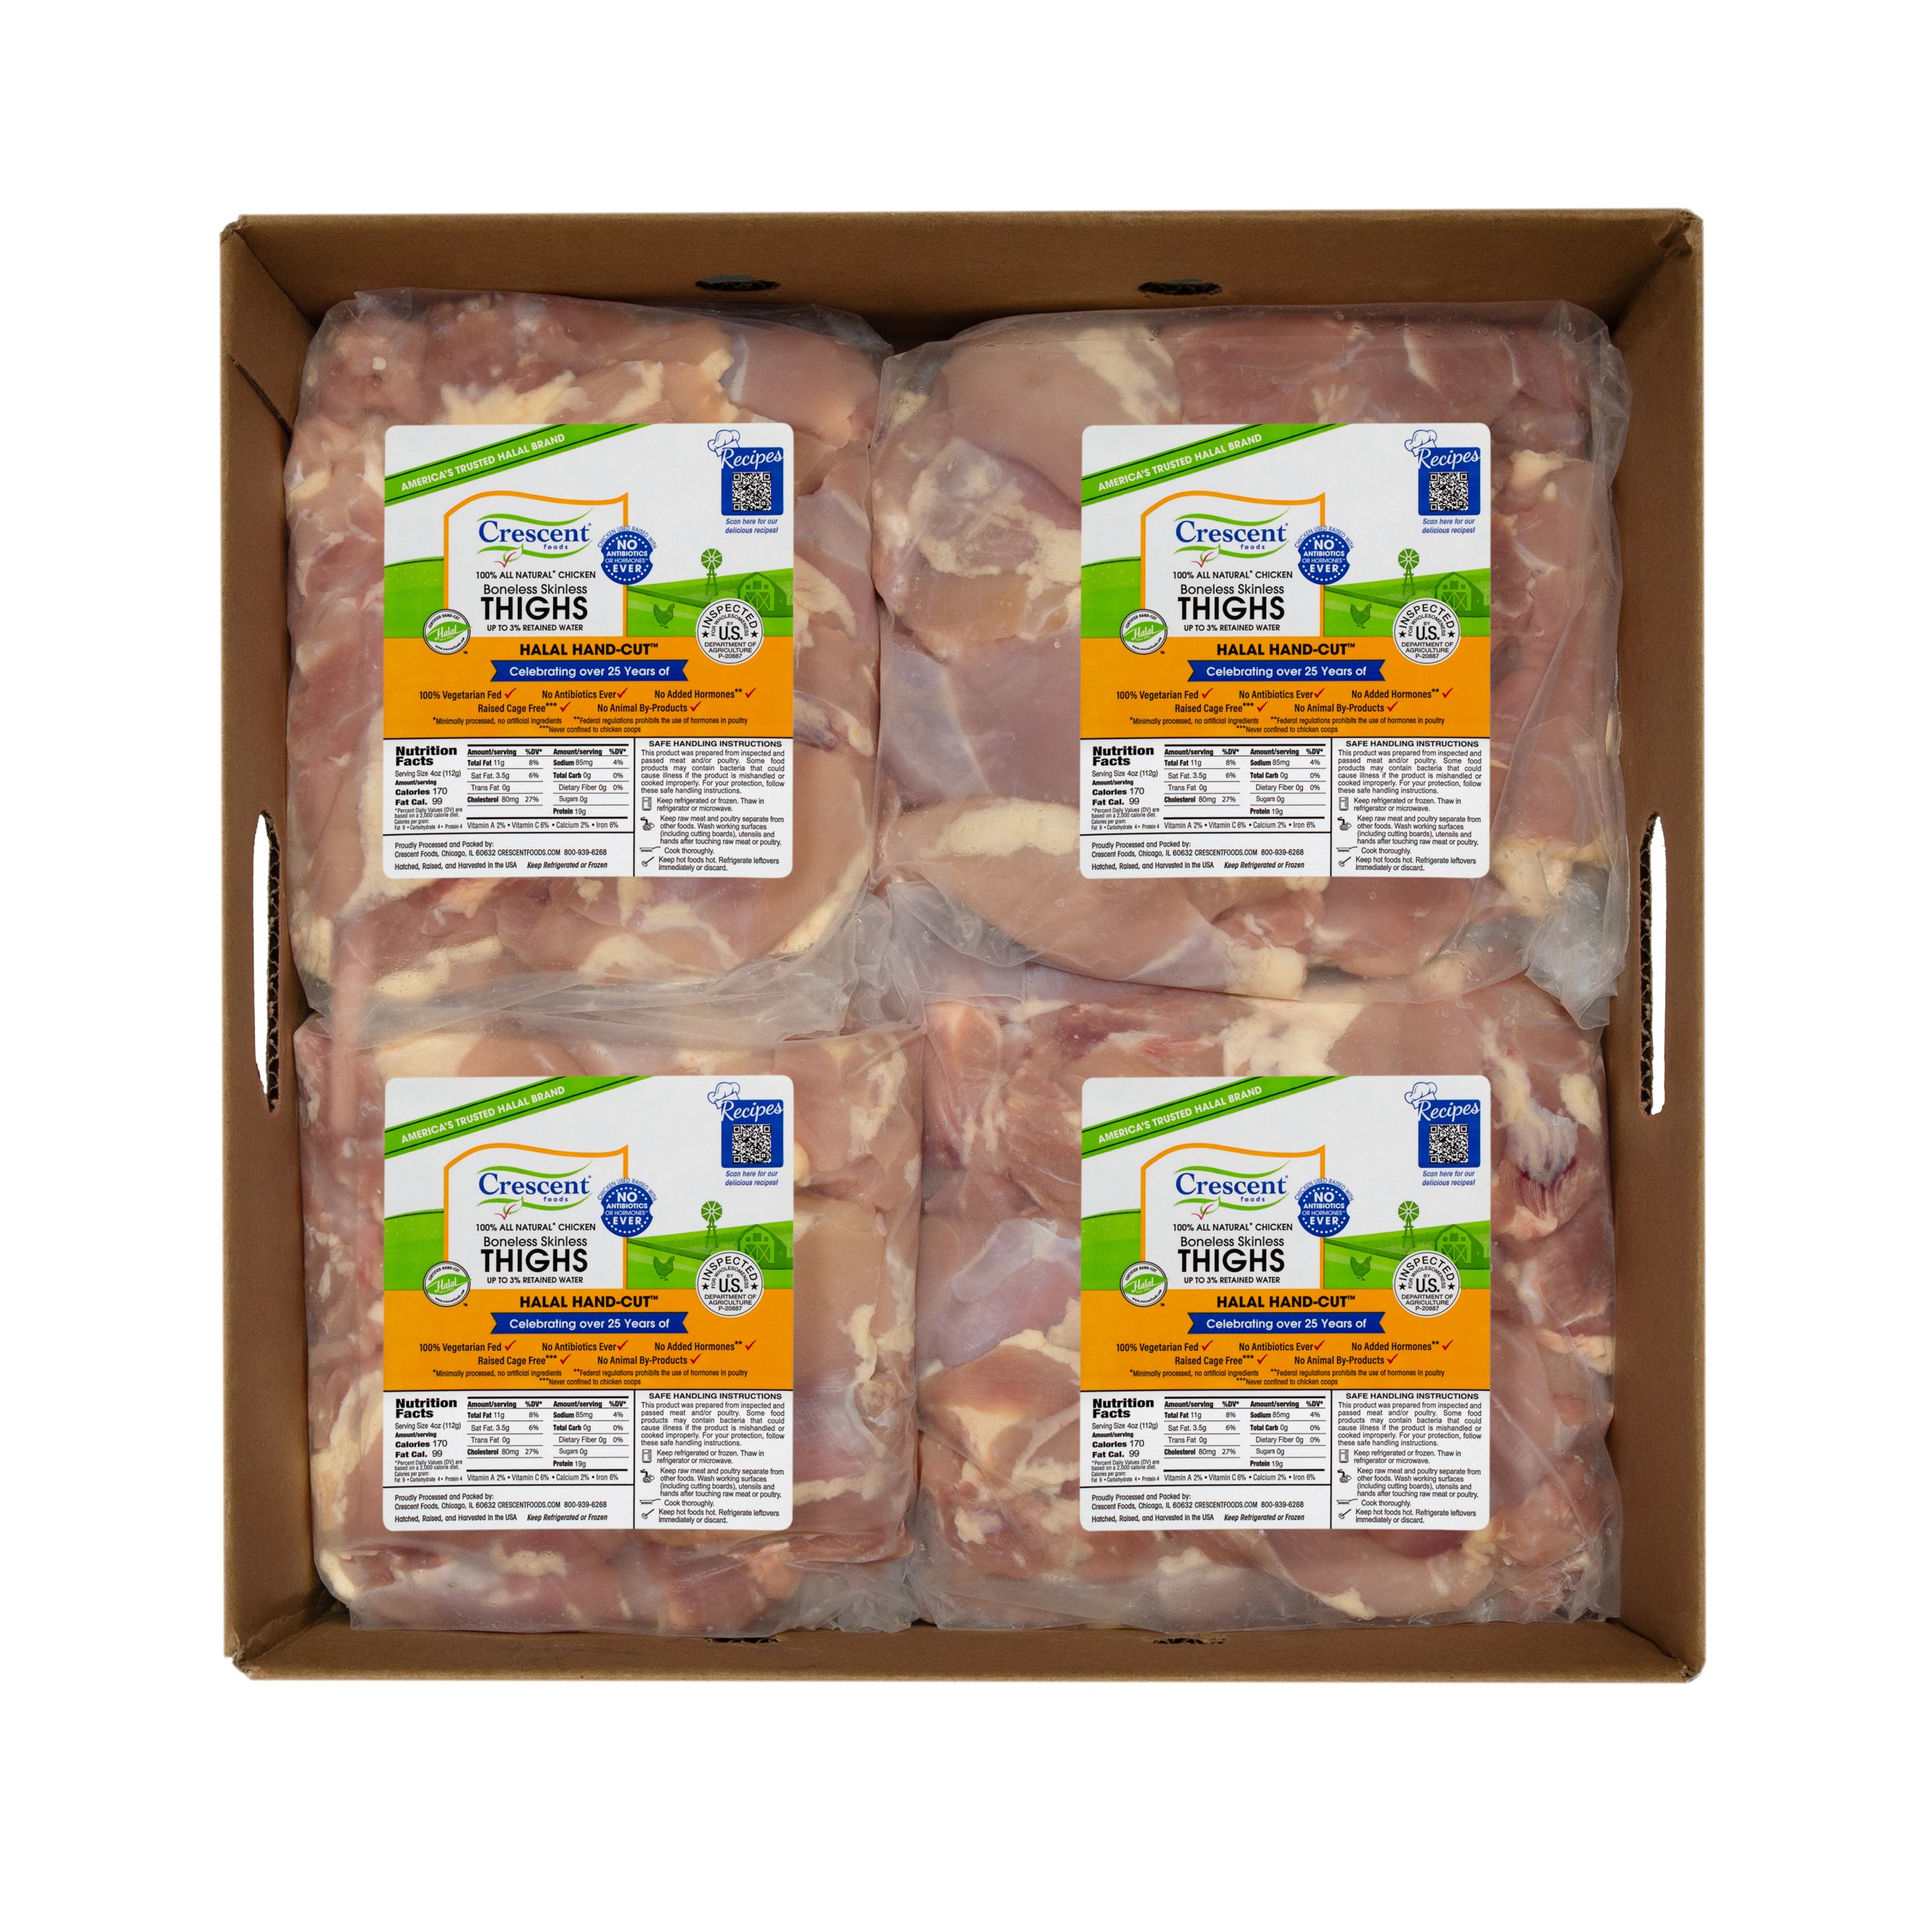 20 Pound Case - All Natural Halal Hand-Cut Boneless Skinless Thighs